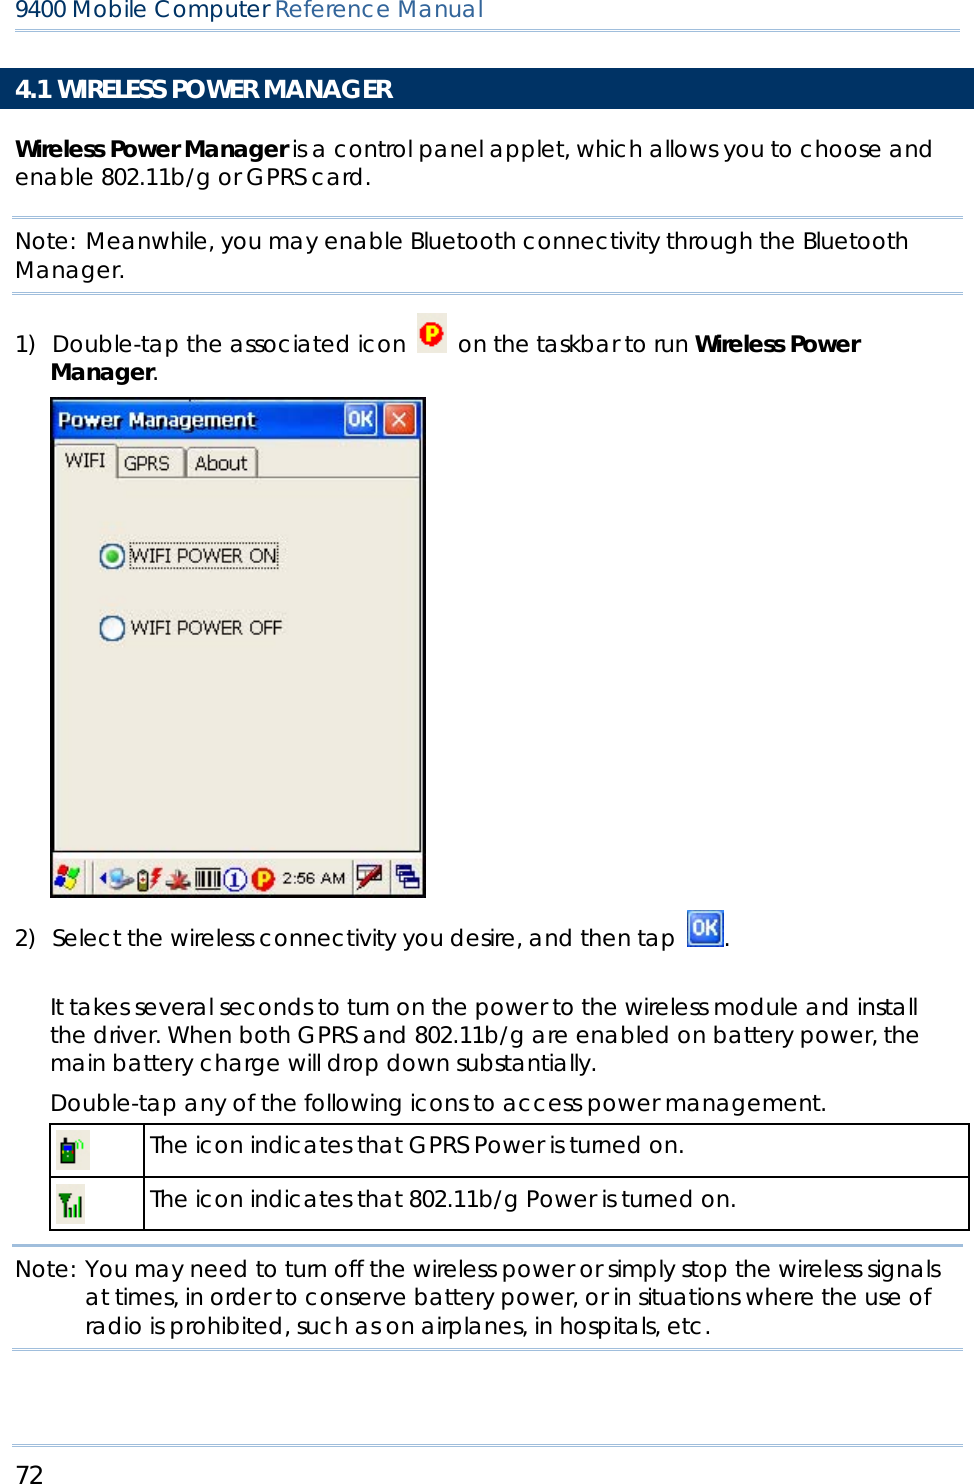 72  9400 Mobile Computer Reference Manual  4.1 WIRELESS POWER MANAGER Wireless Power Manager is a control panel applet, which allows you to choose and enable 802.11b/g or GPRS card. Note: Meanwhile, you may enable Bluetooth connectivity through the Bluetooth Manager. 1) Double-tap the associated icon    on the taskbar to run Wireless Power Manager.  2) Select the wireless connectivity you desire, and then tap  .                     It takes several seconds to turn on the power to the wireless module and install the driver. When both GPRS and 802.11b/g are enabled on battery power, the main battery charge will drop down substantially. Double-tap any of the following icons to access power management.  The icon indicates that GPRS Power is turned on.  The icon indicates that 802.11b/g Power is turned on.  Note: You may need to turn off the wireless power or simply stop the wireless signals at times, in order to conserve battery power, or in situations where the use of radio is prohibited, such as on airplanes, in hospitals, etc.   